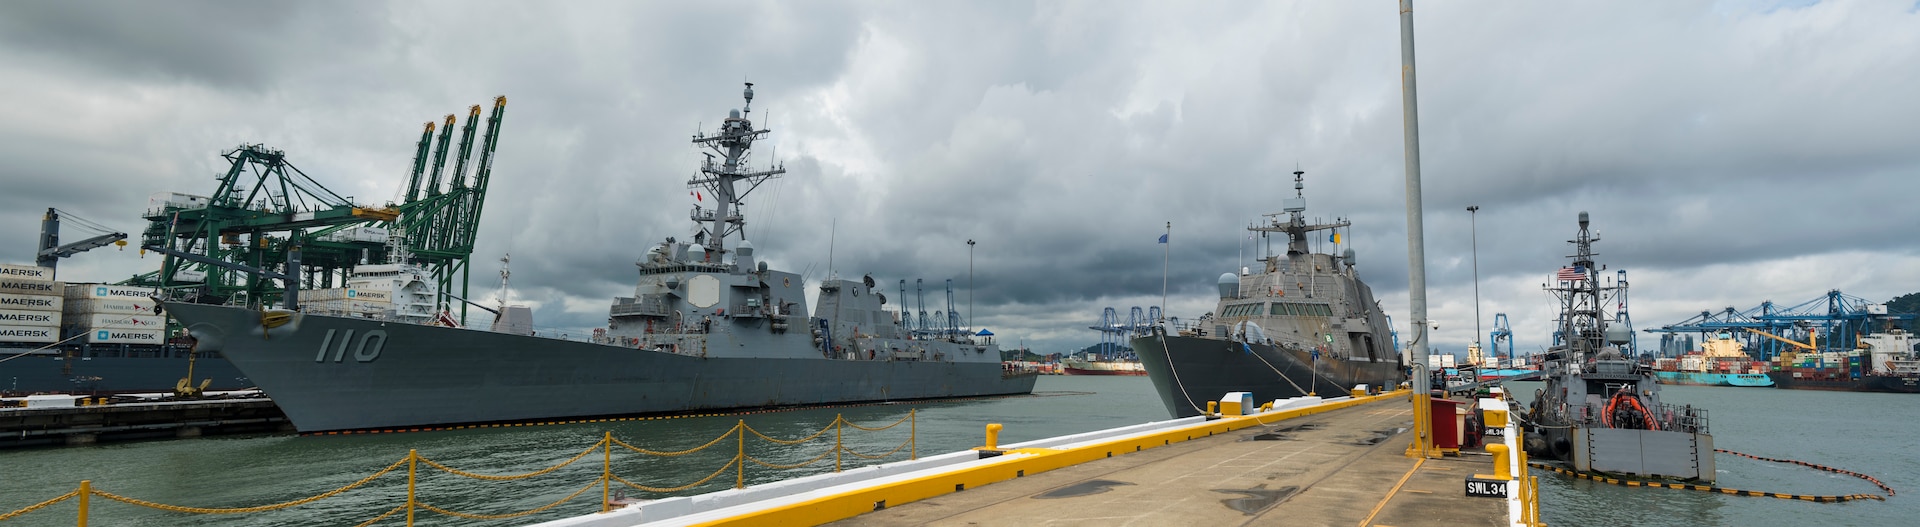 The Cyclone-class coastal patrol ship USS Tornado (PC 14), Arleigh Burke-class guided missile destroyer USS William P. Lawrence (DDG 110) and the Freedom-variant littoral combat ship USS Detroit (LCS 7) moored pierside in Vasco Nunez de Balboa.